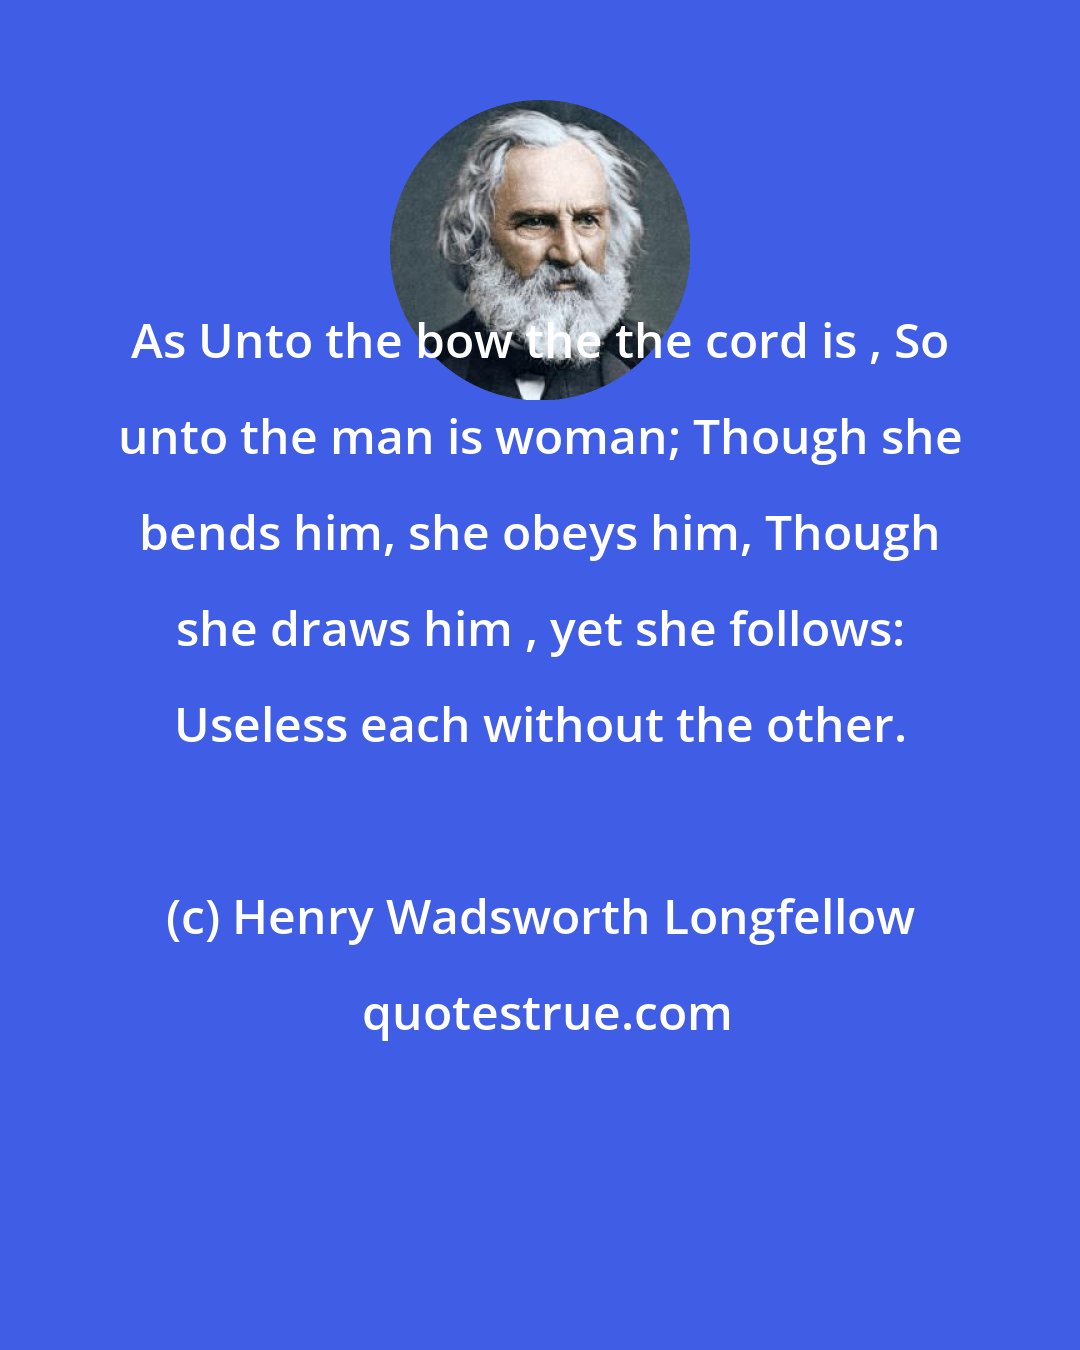 Henry Wadsworth Longfellow: As Unto the bow the the cord is , So unto the man is woman; Though she bends him, she obeys him, Though she draws him , yet she follows: Useless each without the other.